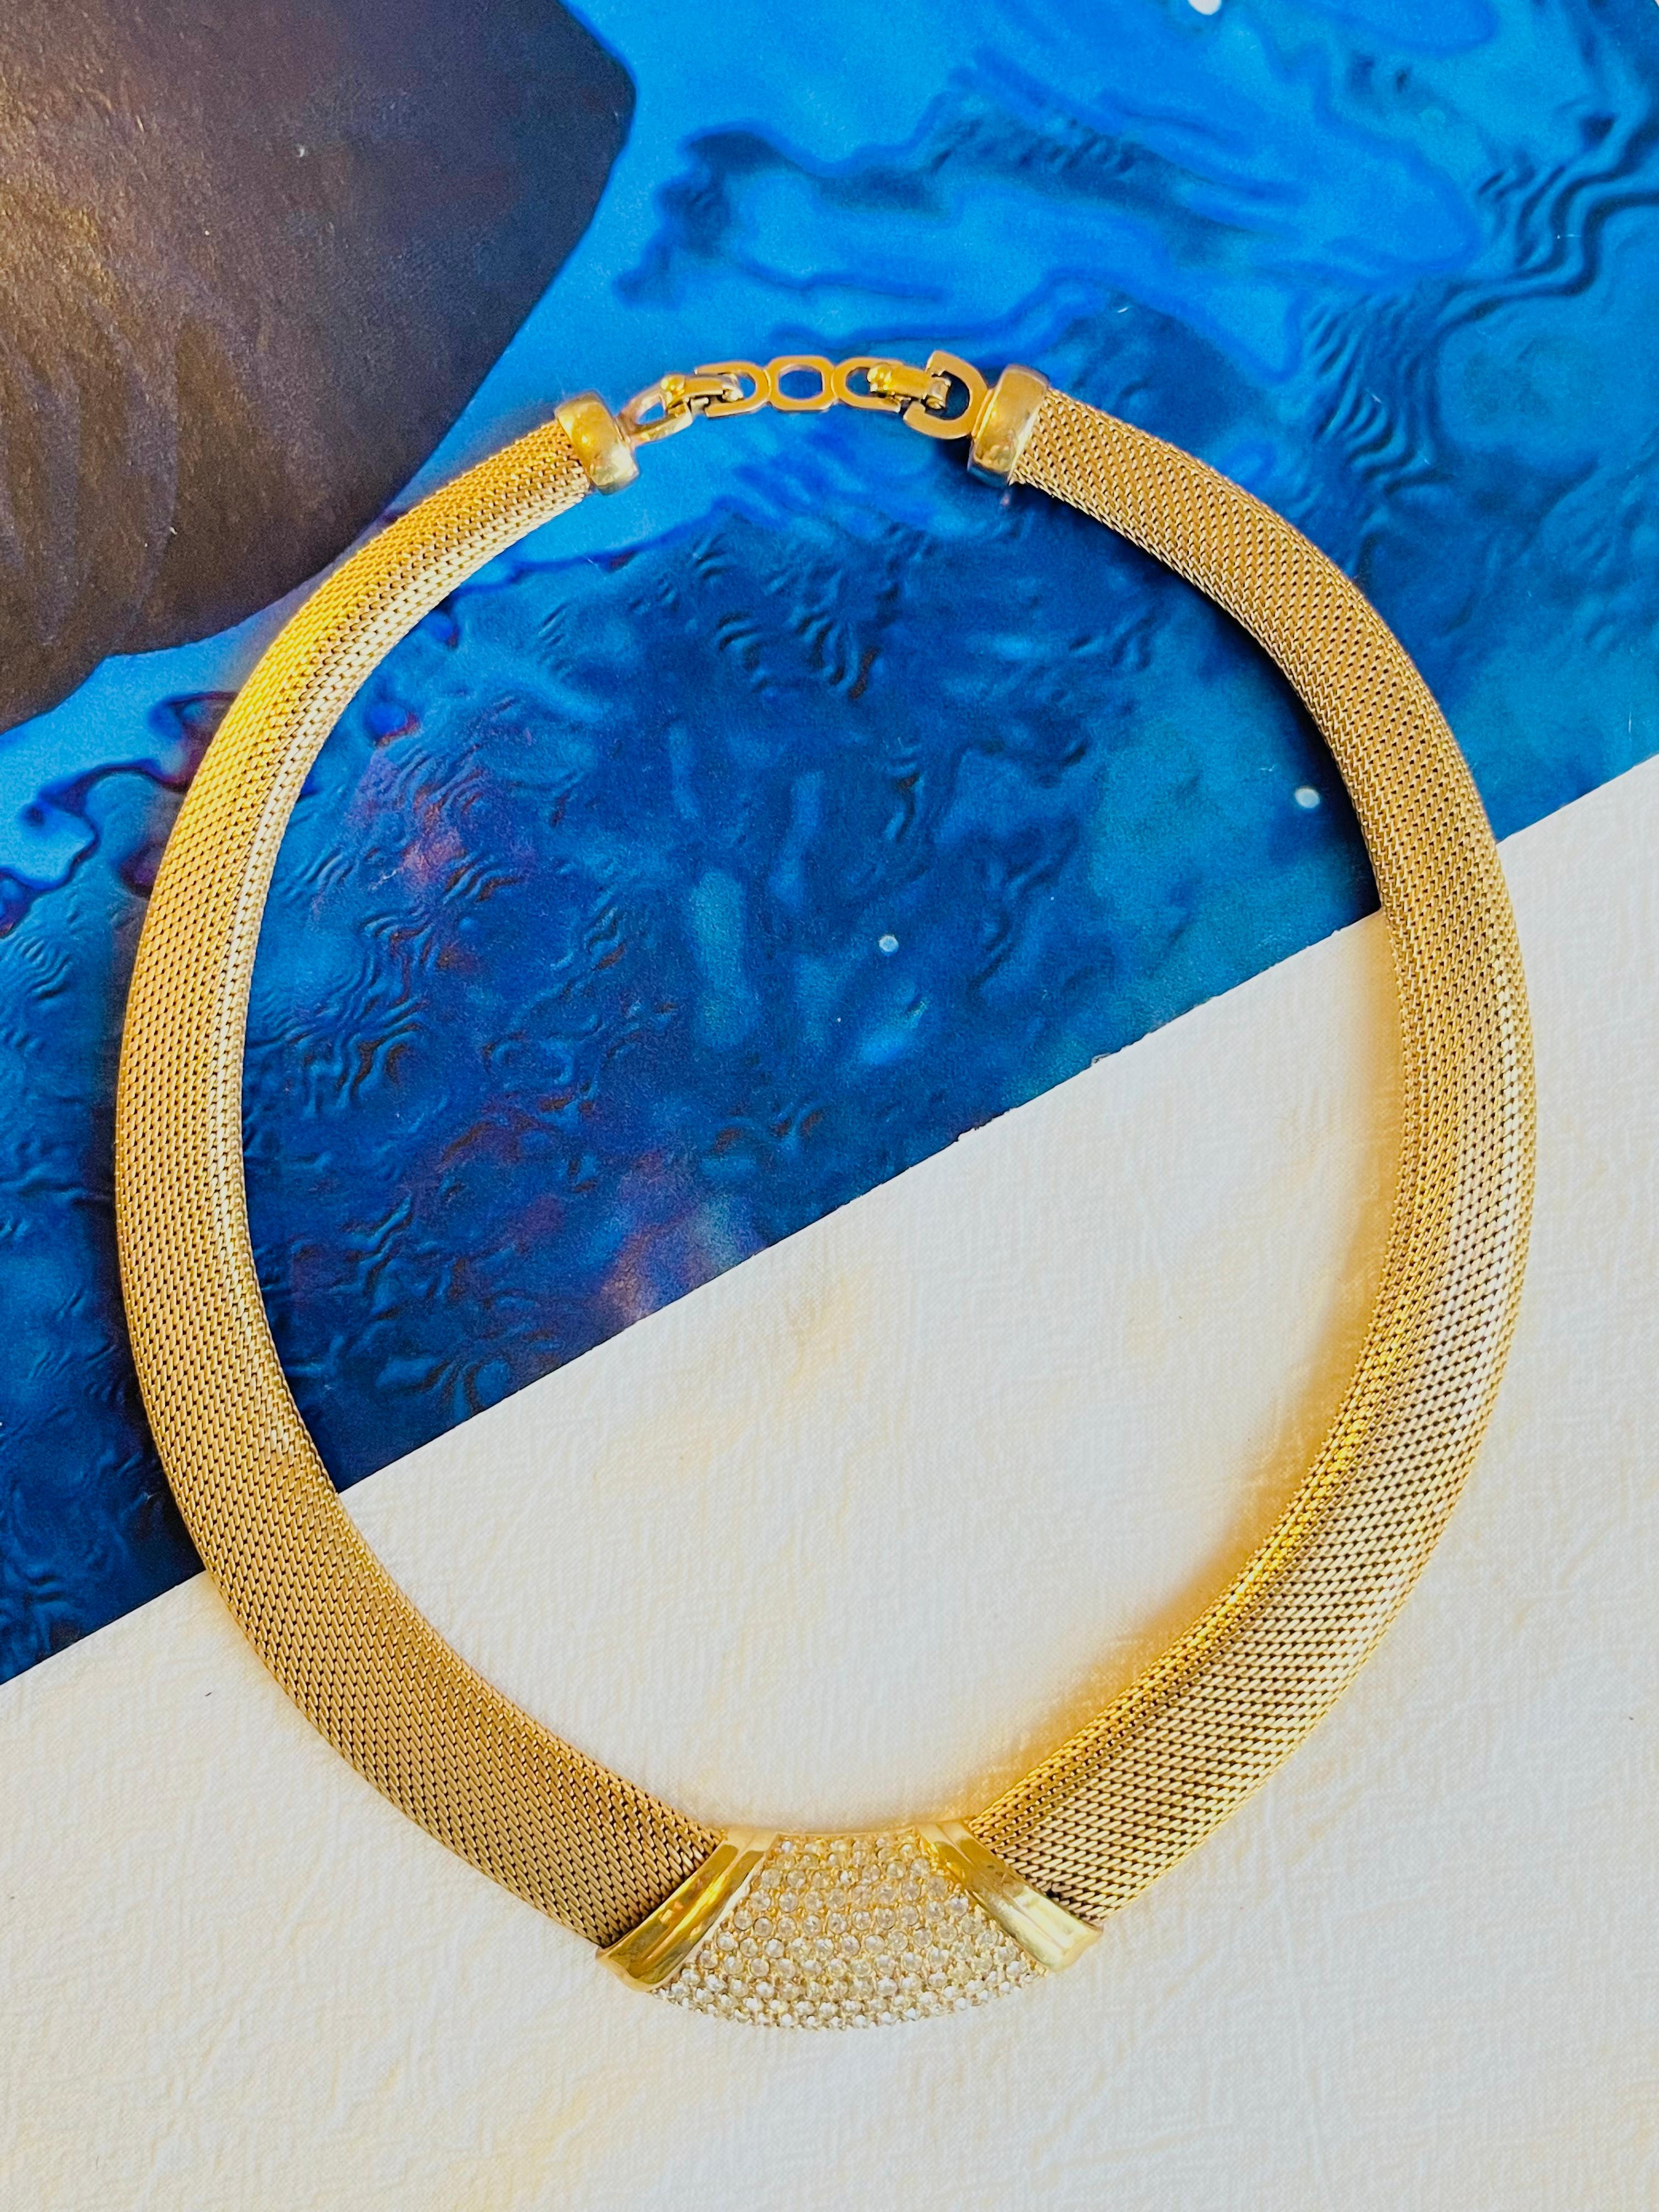 Christian Dior Vintage 1980s Crystals Pendant Chunky Snake Mesh Choker Necklace, Gold Plated

Very excellent condition. Not any stones and colour loss. 100% Genuine.

Marked 'Chr.Dior (C) '. Rare to find. 

Materials: Gold Plated metal,